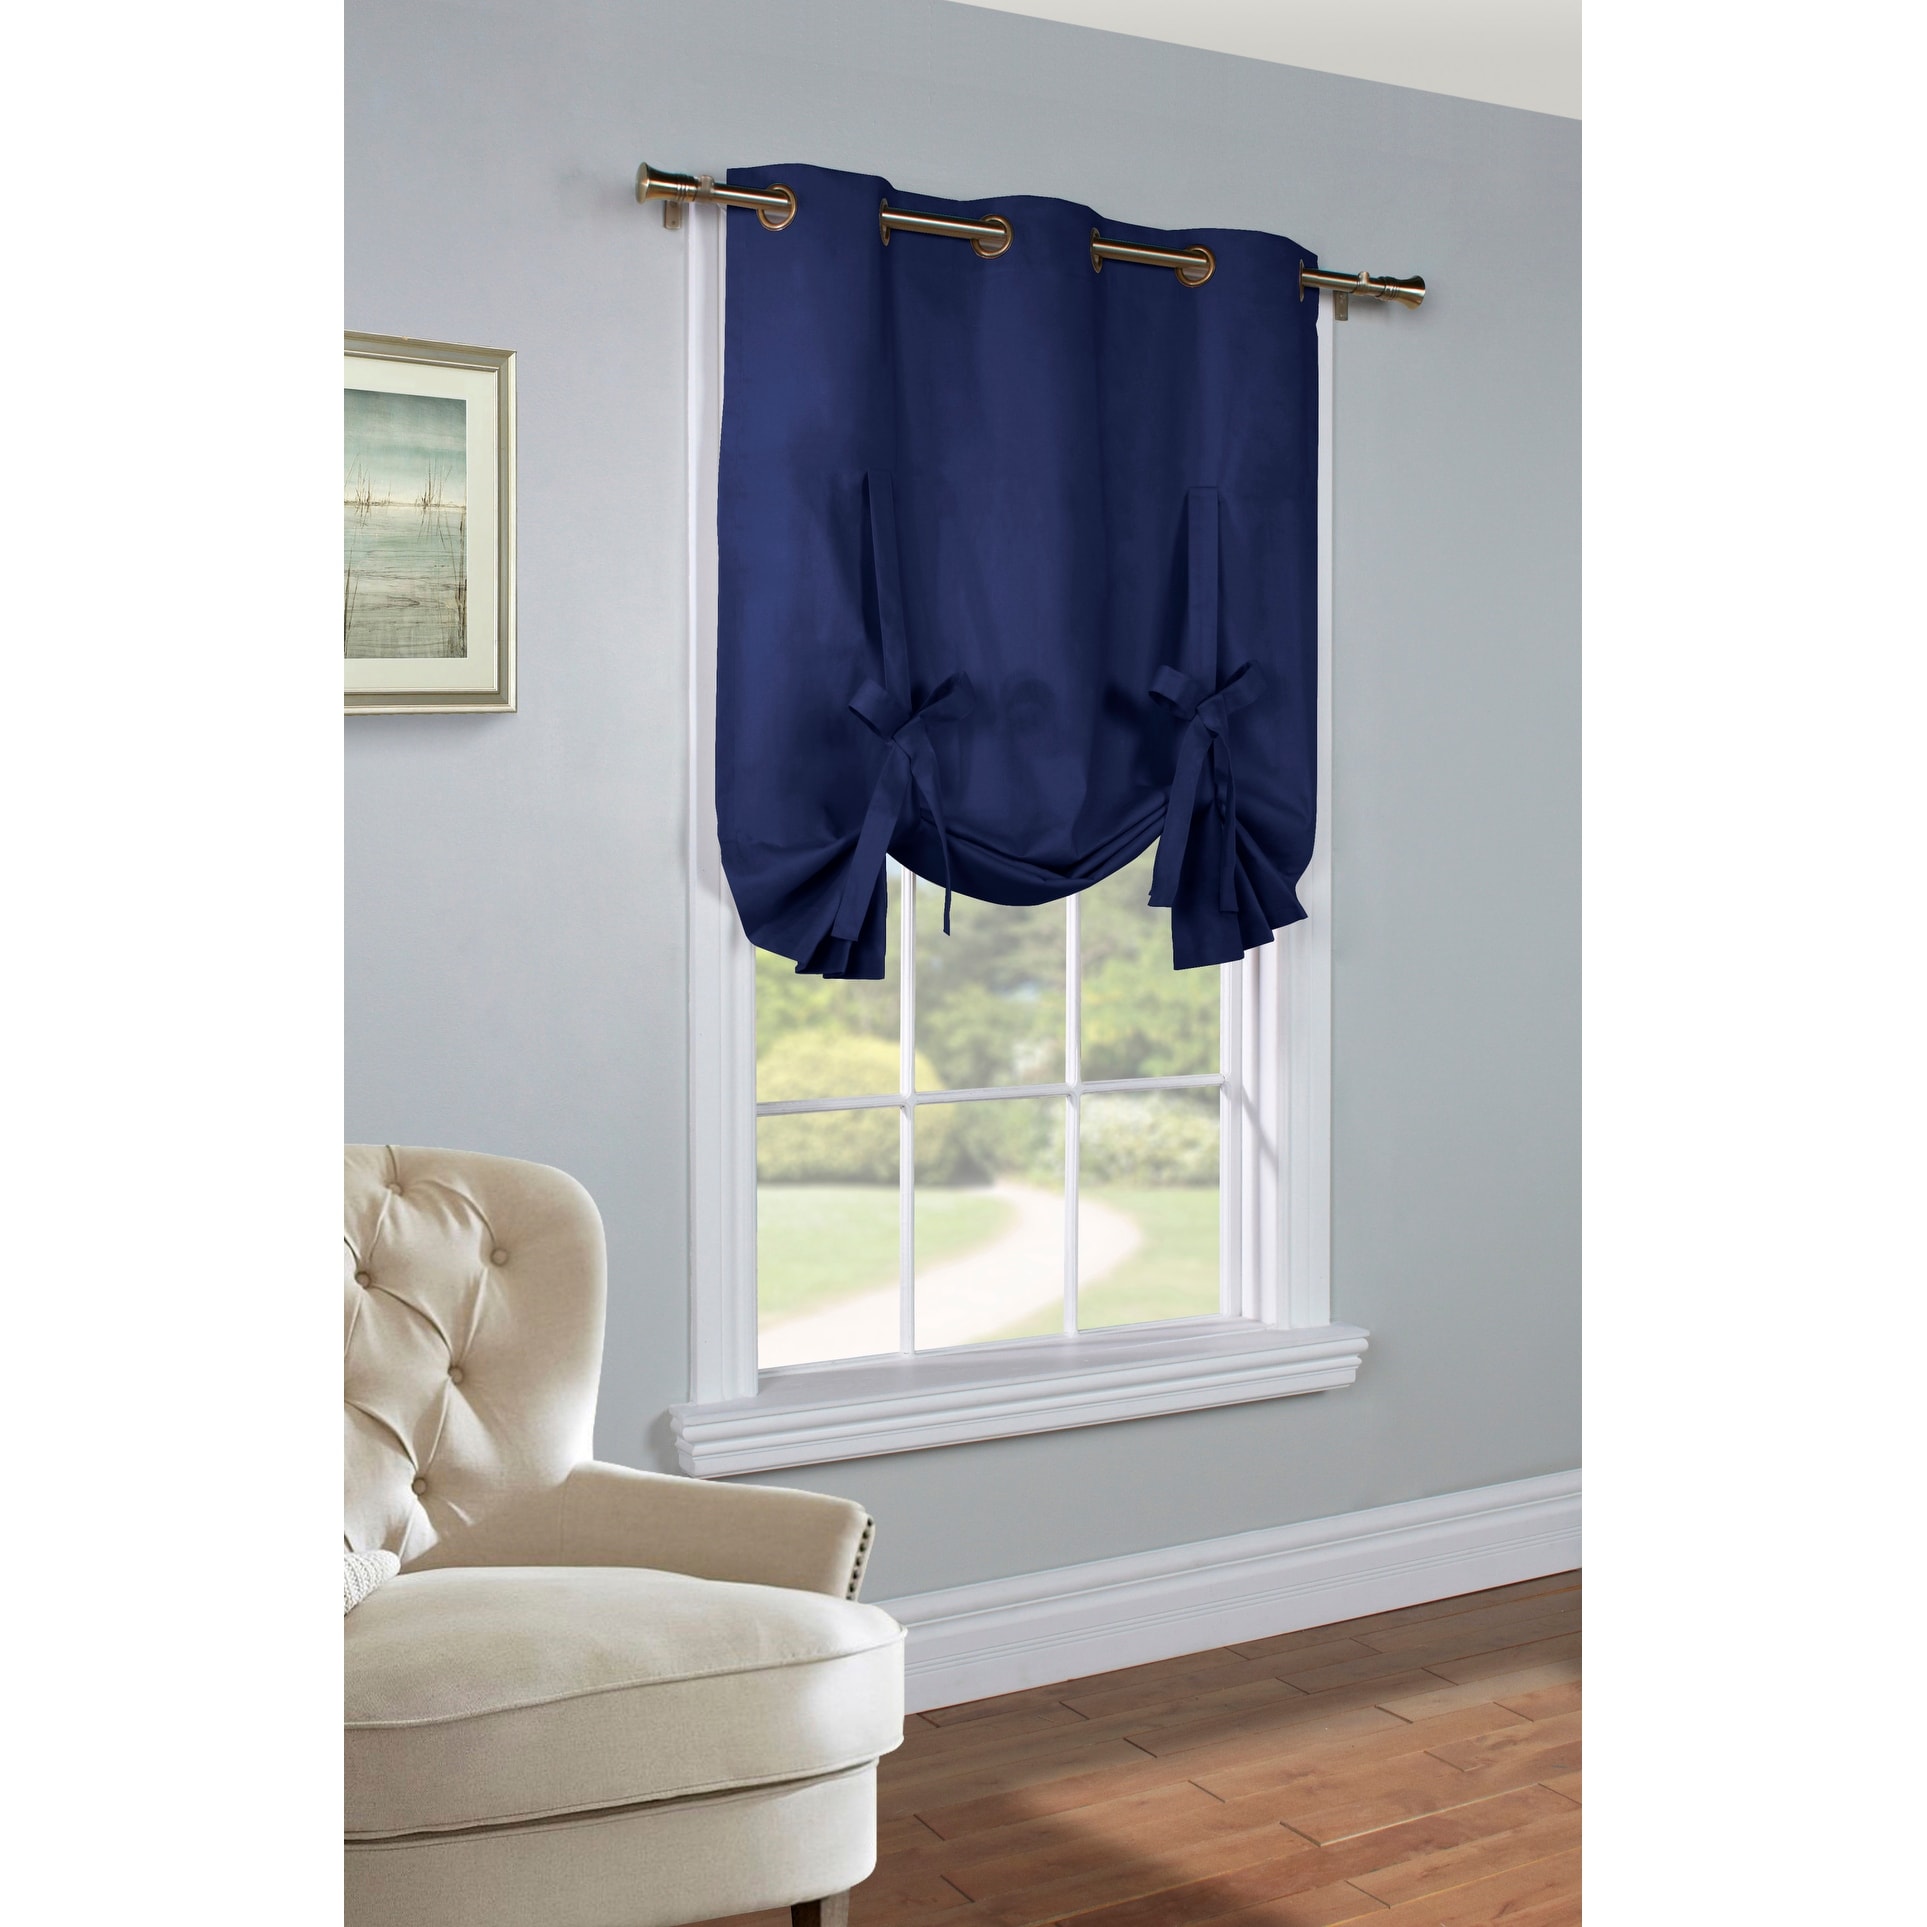 Ava Blackout Weave Curtains Grommet Tie Up Shade for Small Window 46" W X 63" 